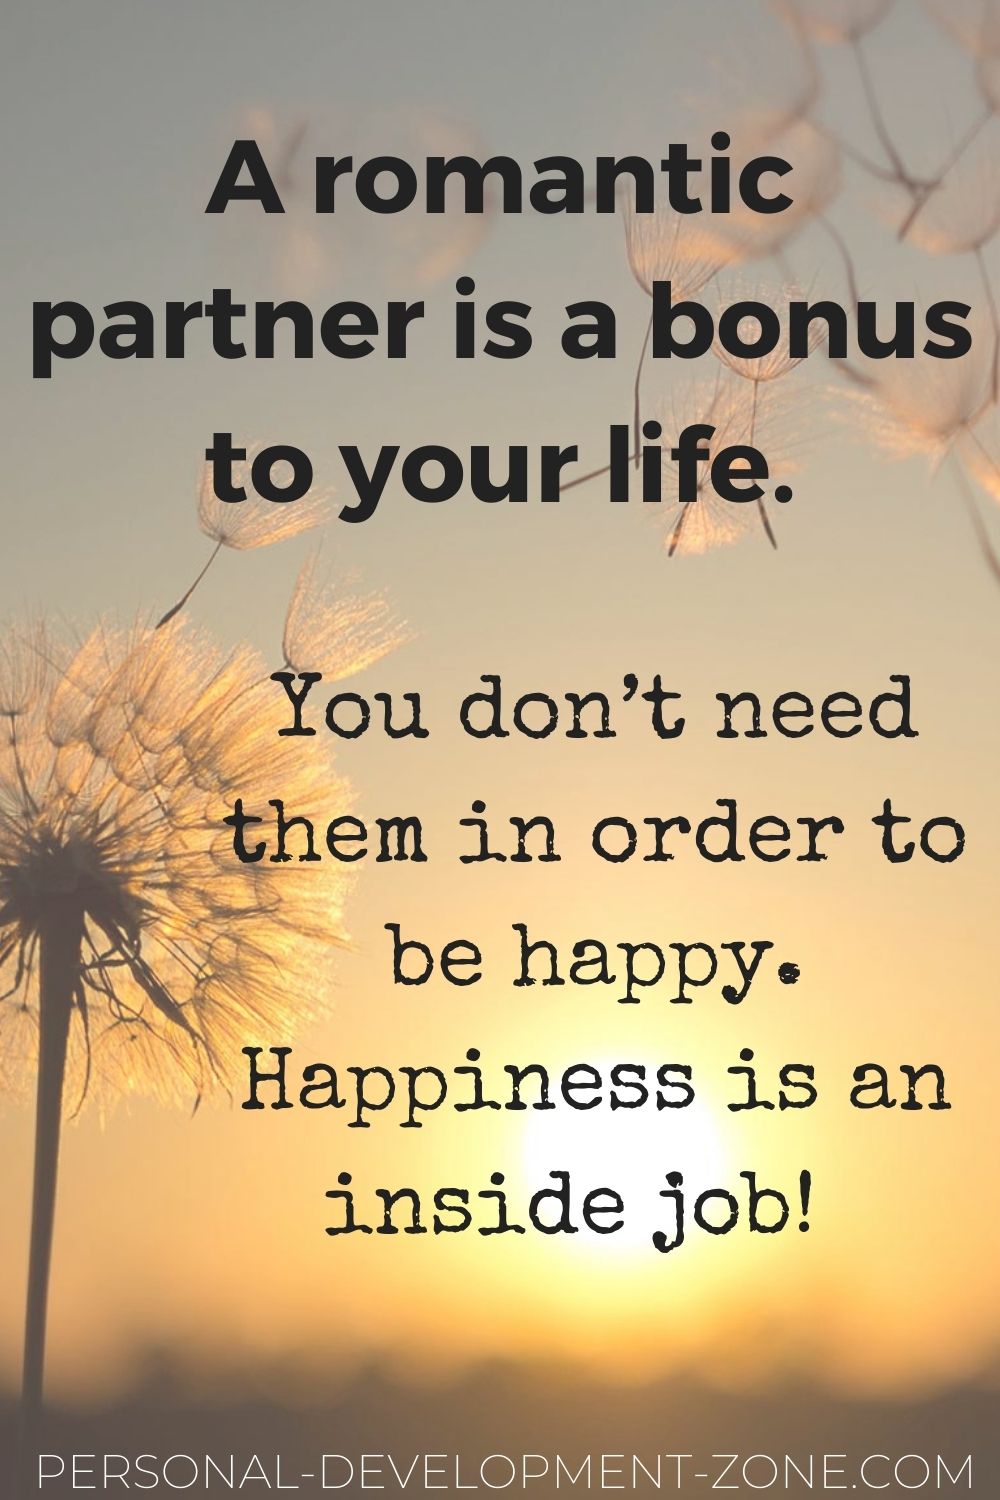 dating quotes a romantic partner is a bonus to your life you don't need them in order to be happy happiness is an inside job